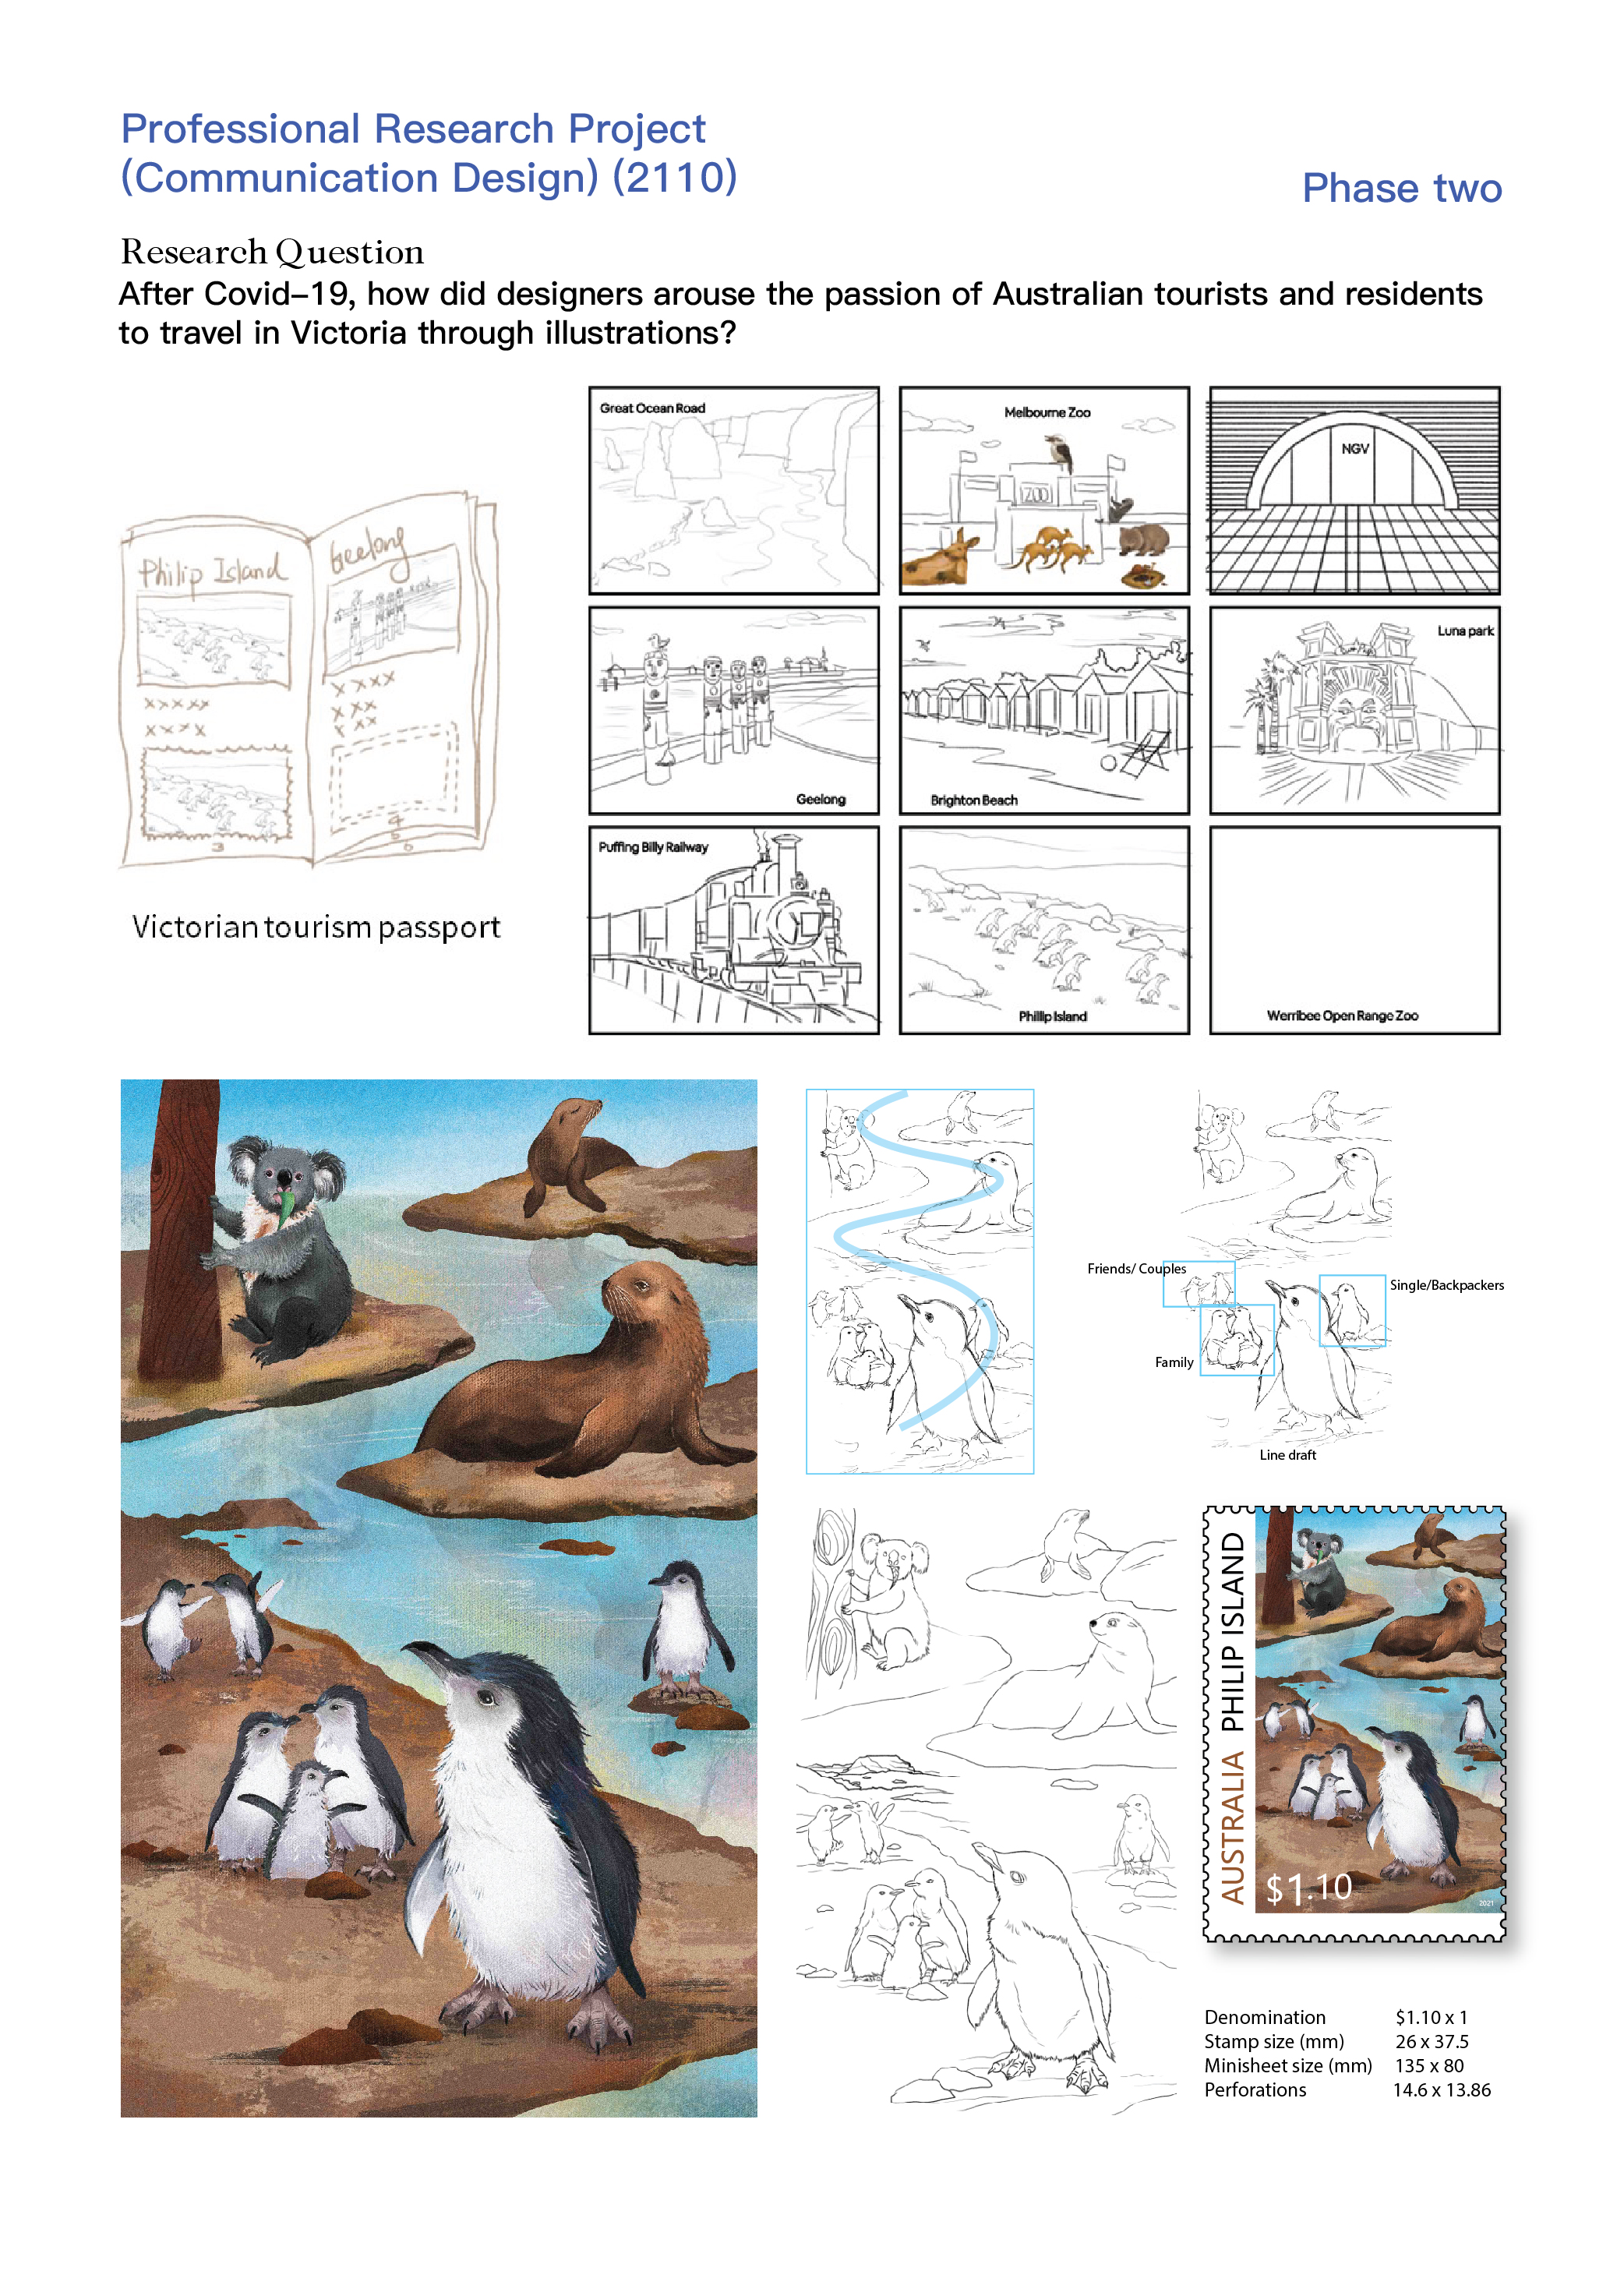 I planned to design a Victorian tourism passport with 9 attractions. I would draw illustrations for these attractions. Because I have practiced how to draw Australian animals in advance, I decided to finish the illustration of Phillip Island first, since there are many animals on this island.